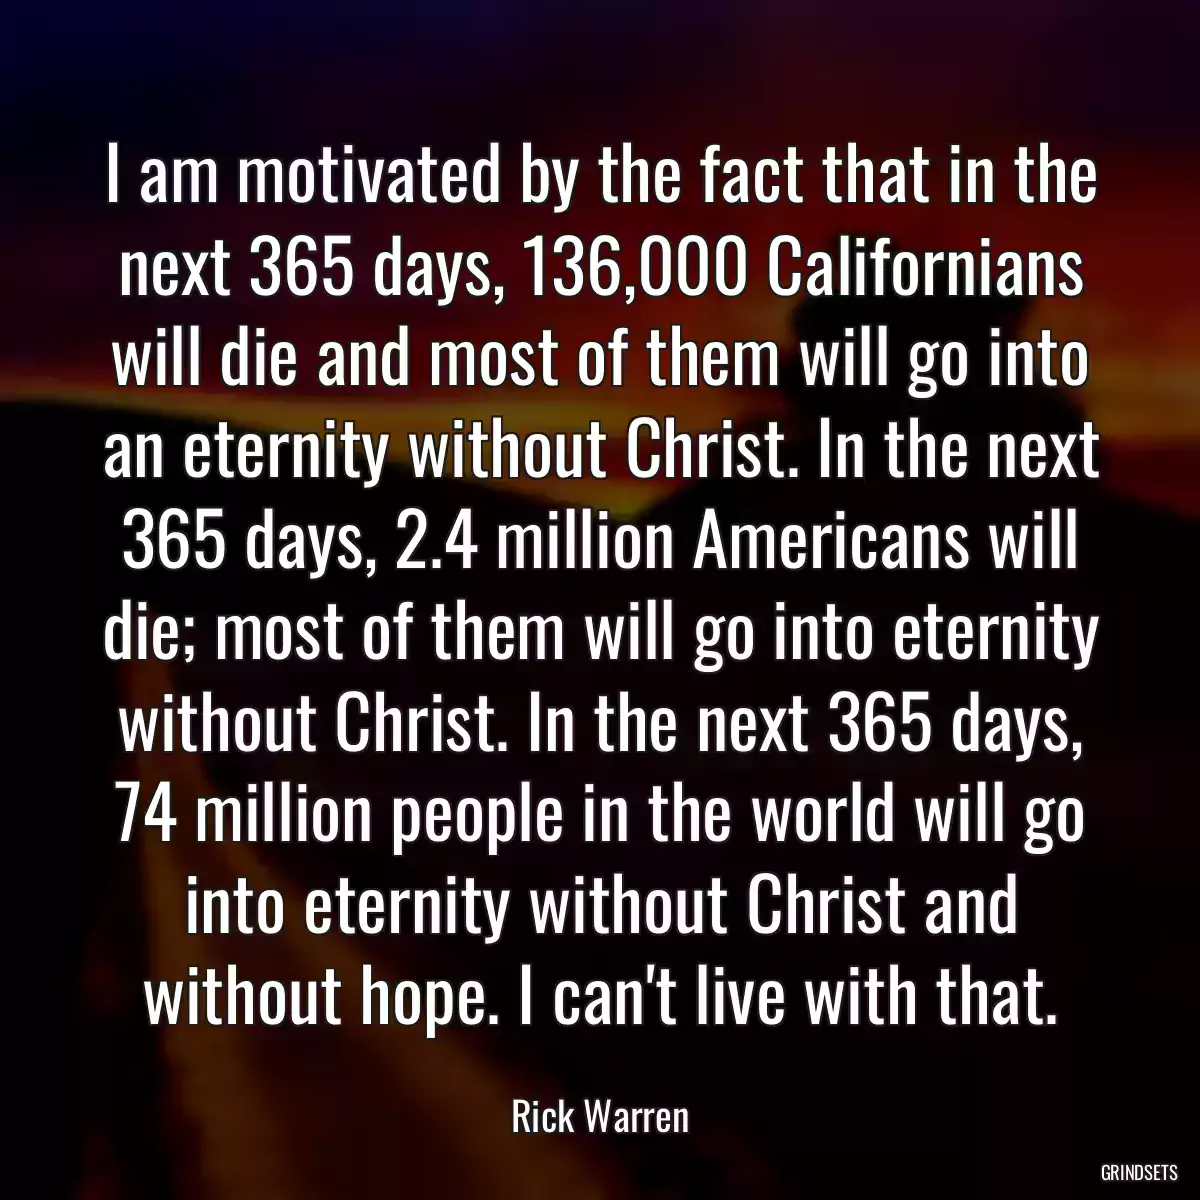 I am motivated by the fact that in the next 365 days, 136,000 Californians will die and most of them will go into an eternity without Christ. In the next 365 days, 2.4 million Americans will die; most of them will go into eternity without Christ. In the next 365 days, 74 million people in the world will go into eternity without Christ and without hope. I can\'t live with that.